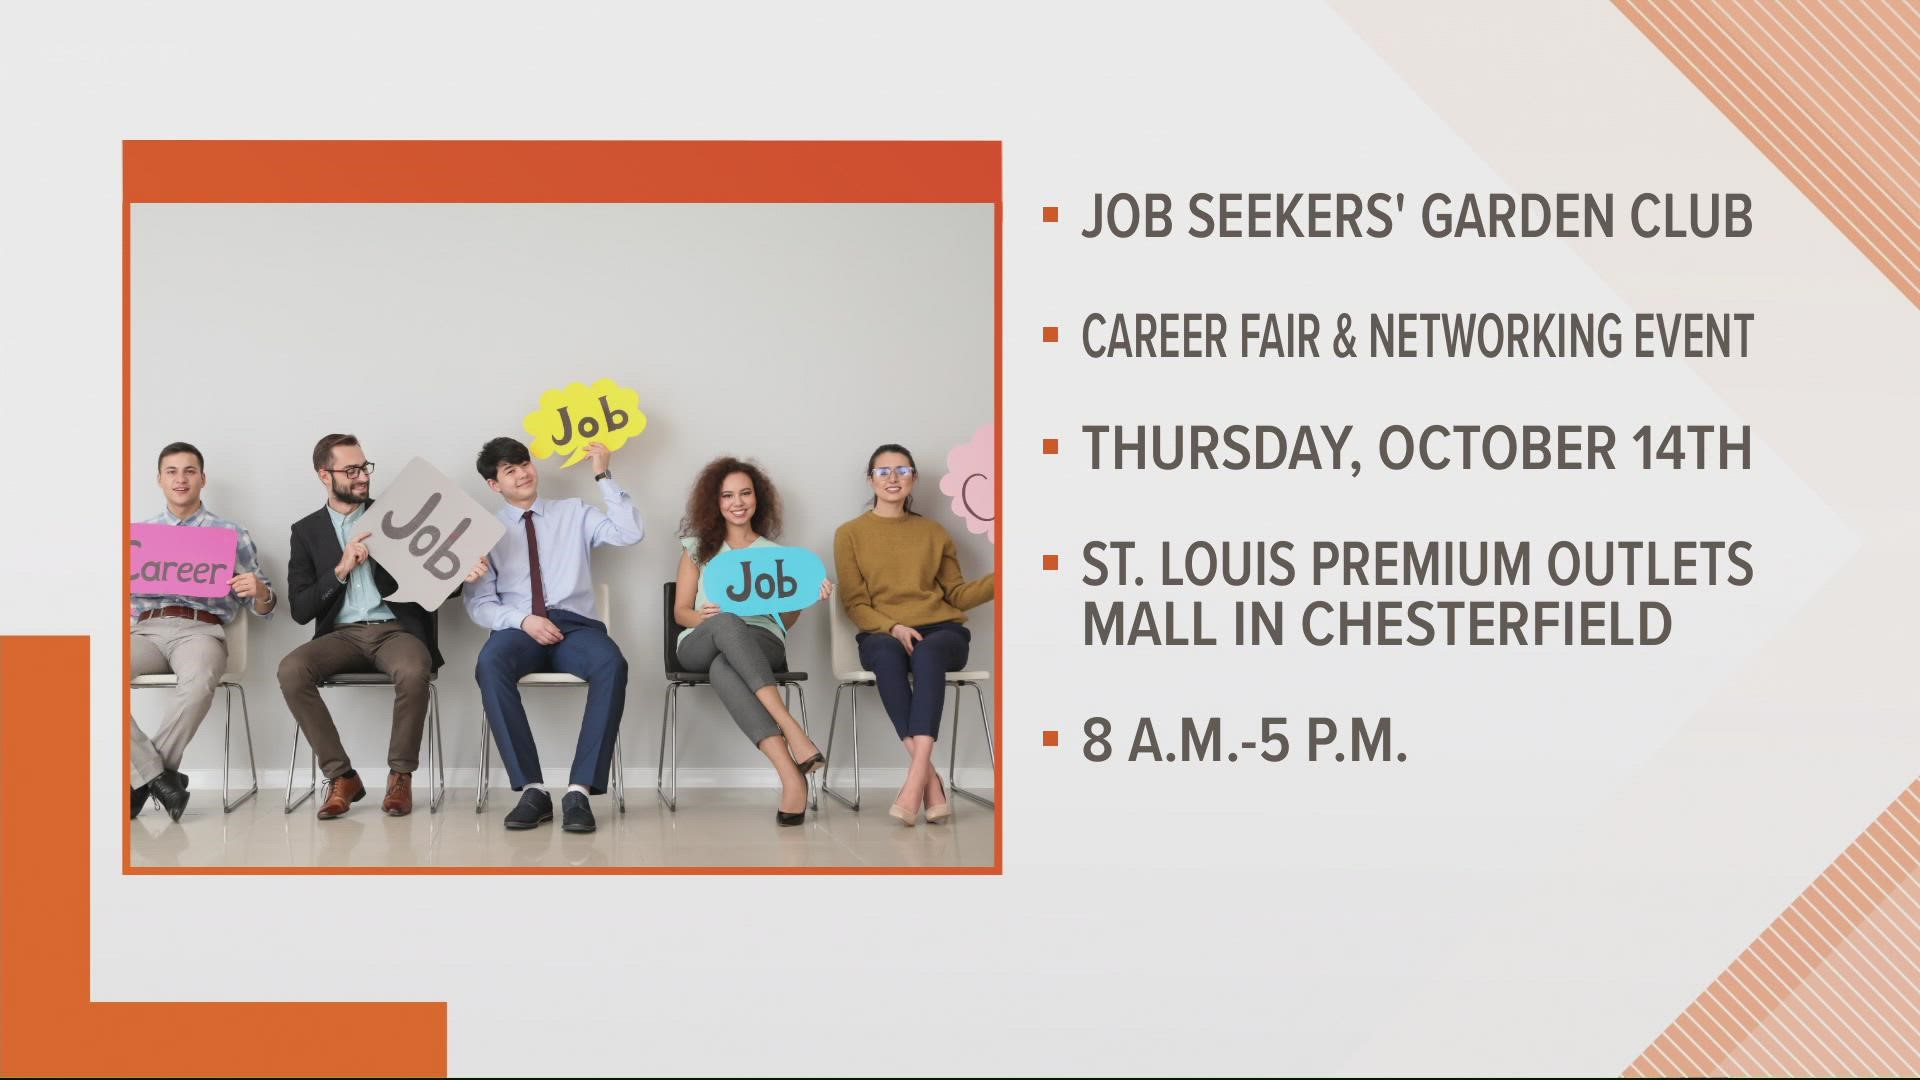 This week's Career Central features two big hiring fairs and opportunities for St. Louis youth to earn money while getting on-the-job experience